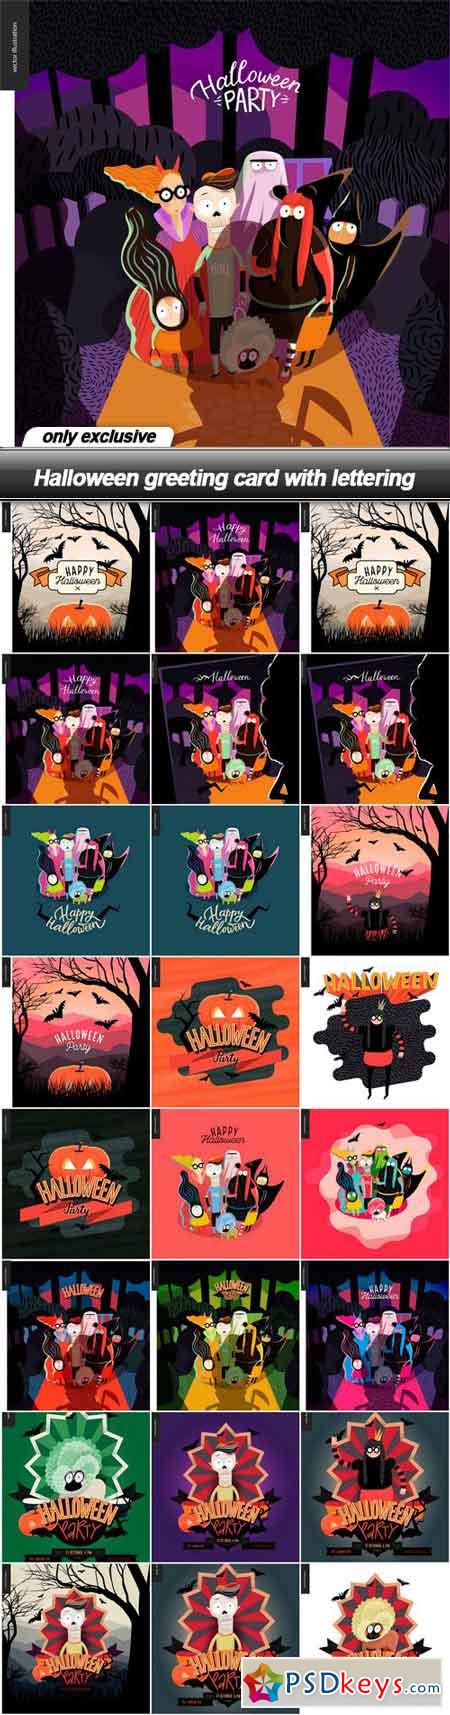 Halloween greeting card with lettering - 25 EPS